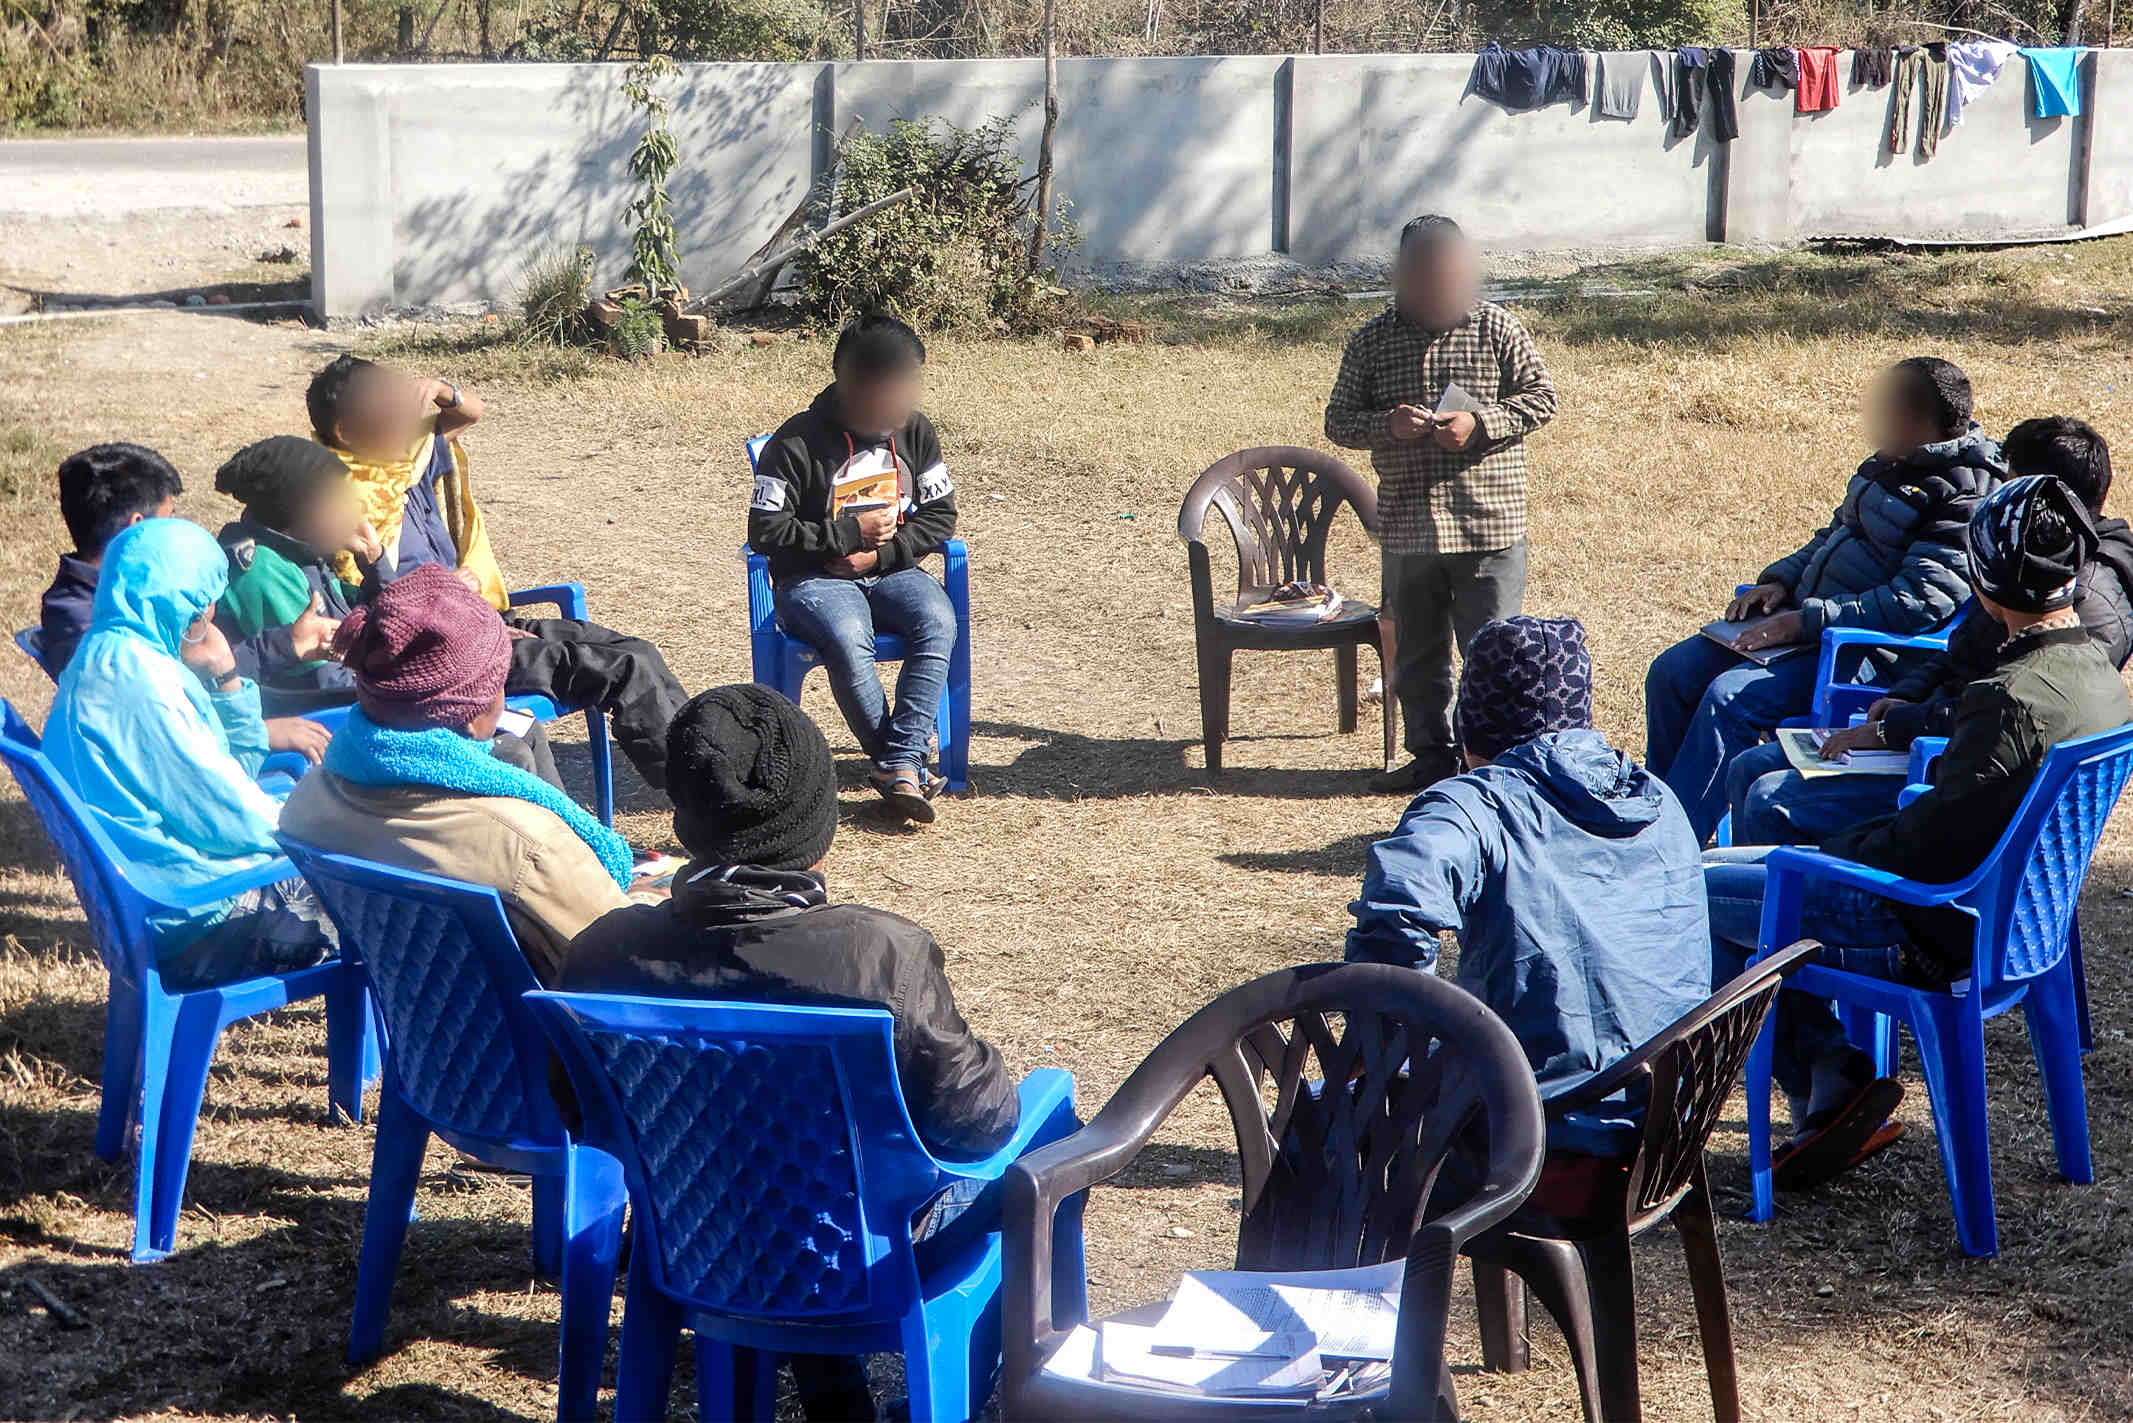 Nepalese Christians meeting outside wearing warm clothes sitting in blue lawn chairs for a Bible study